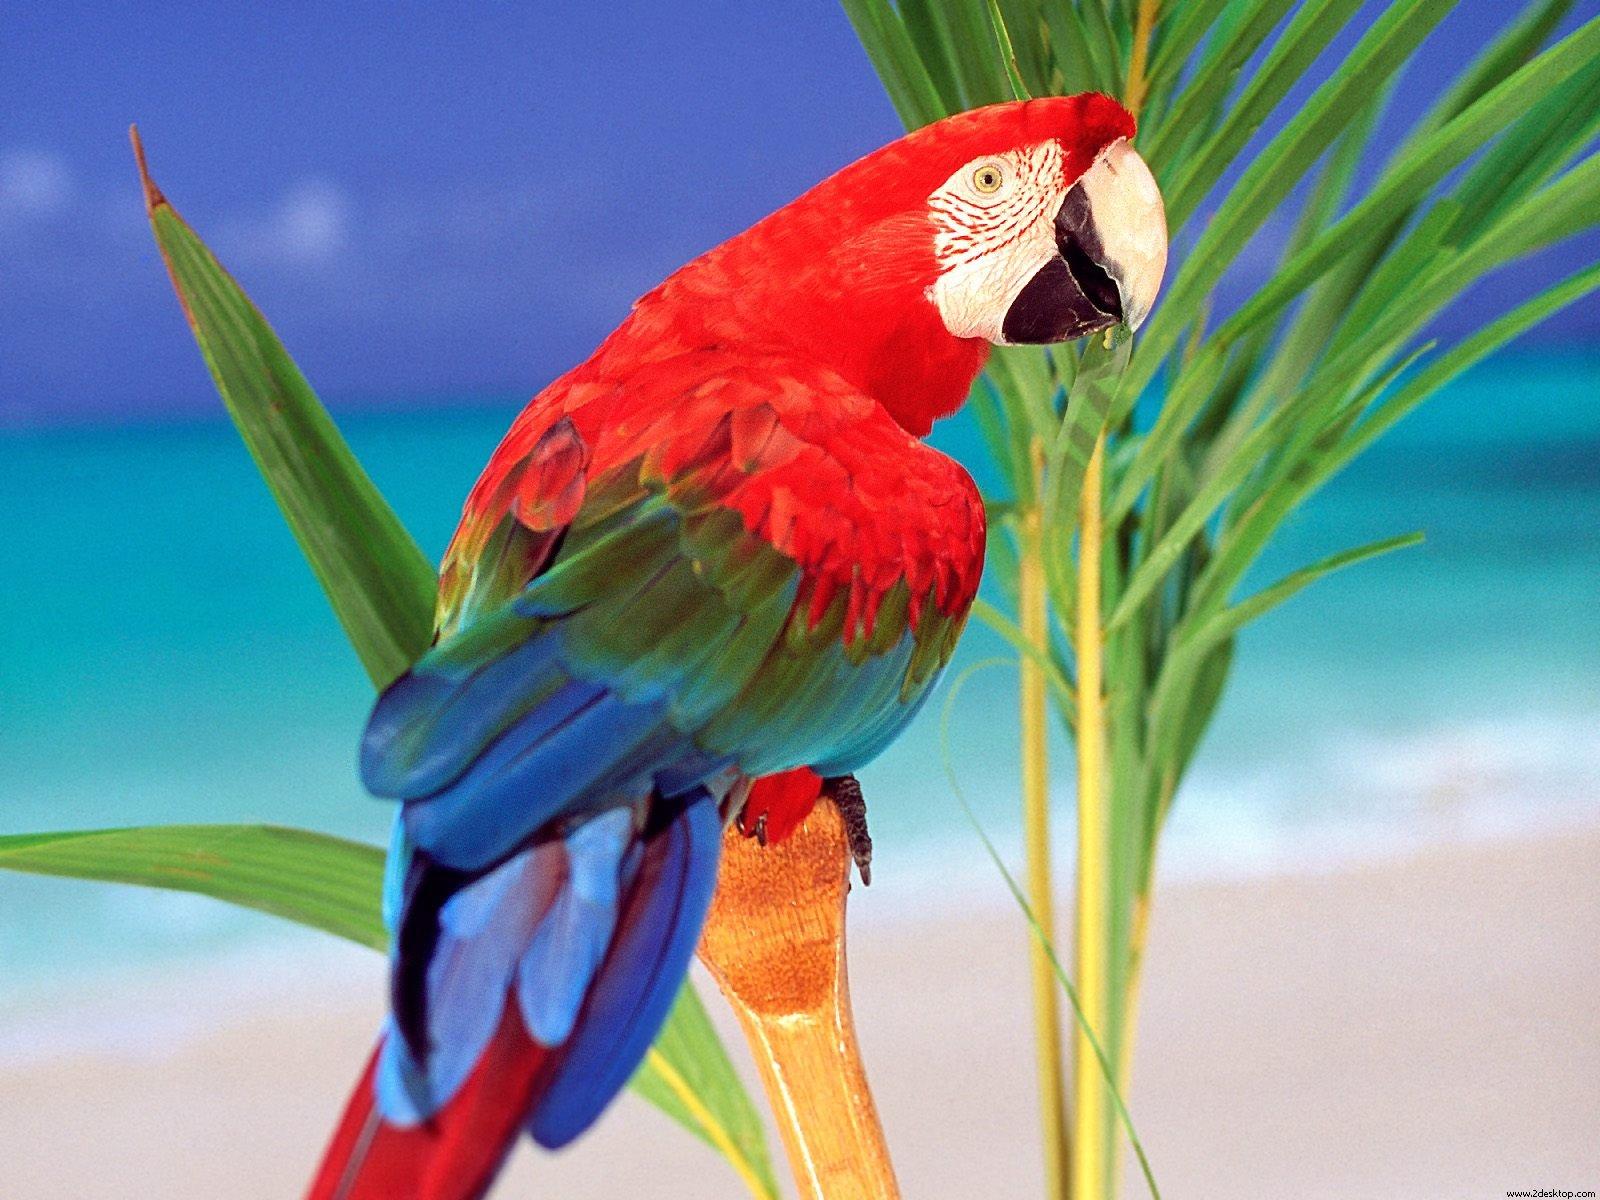 Colorful Parrot Birds Image, Photo Wallpaper Download